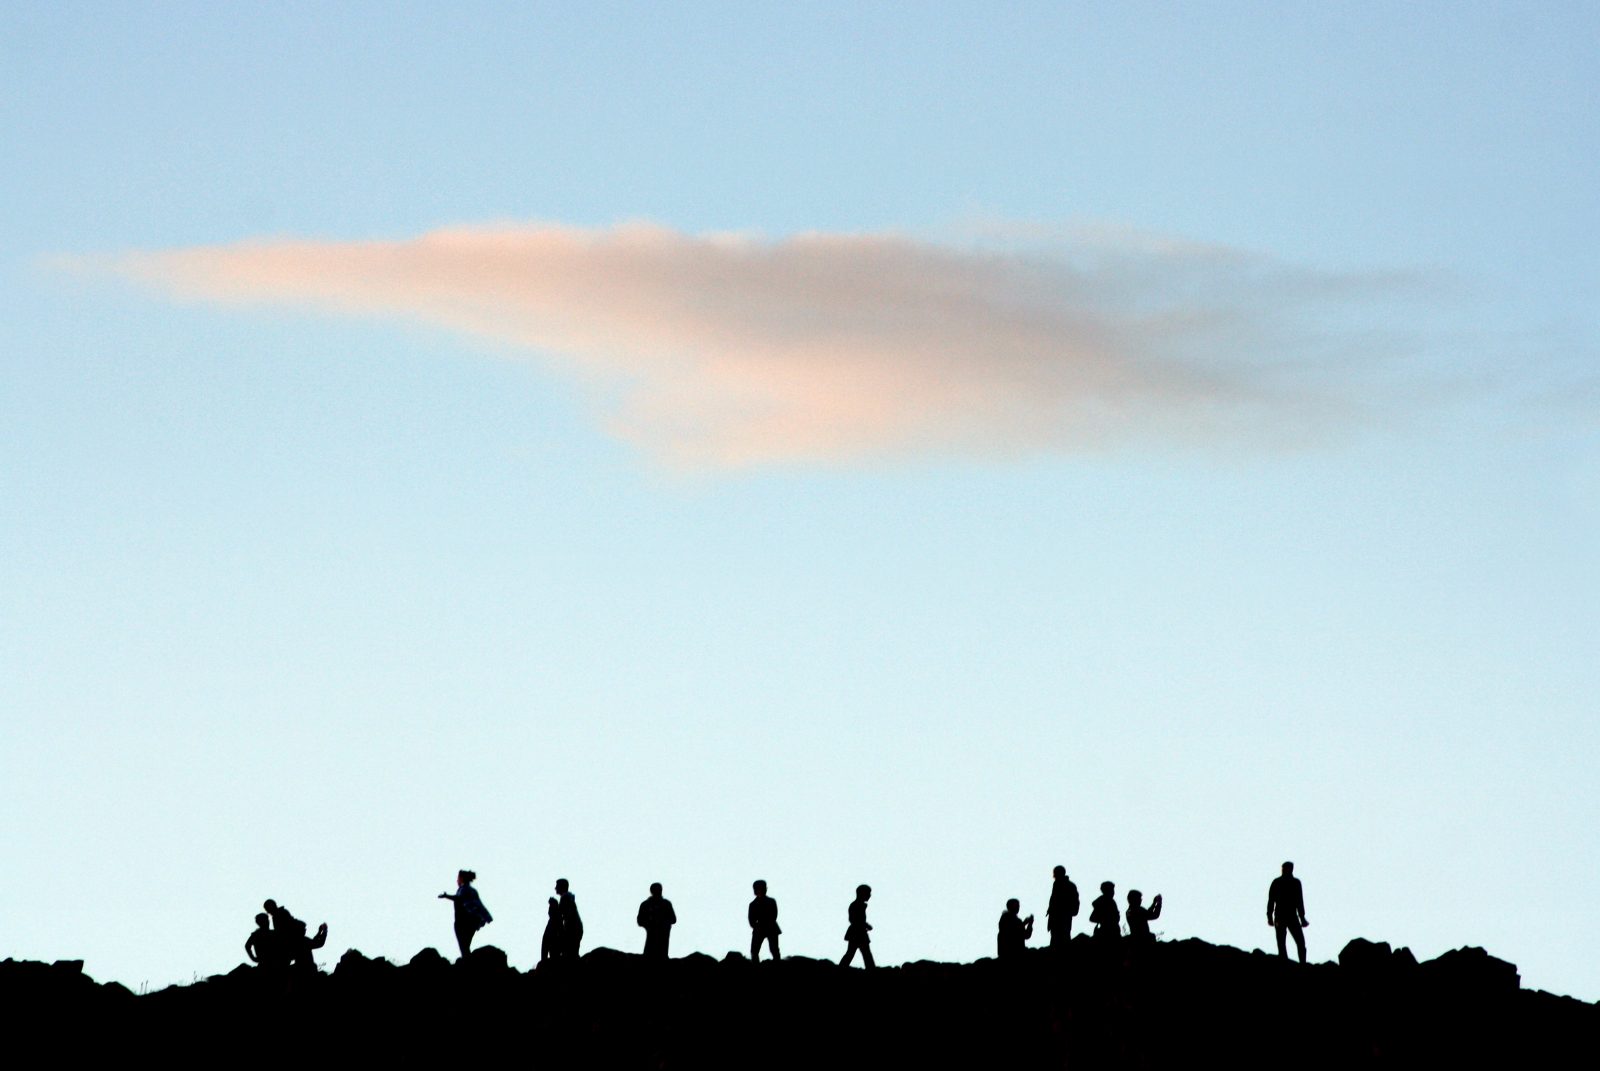 Silhouette of people standing on rock